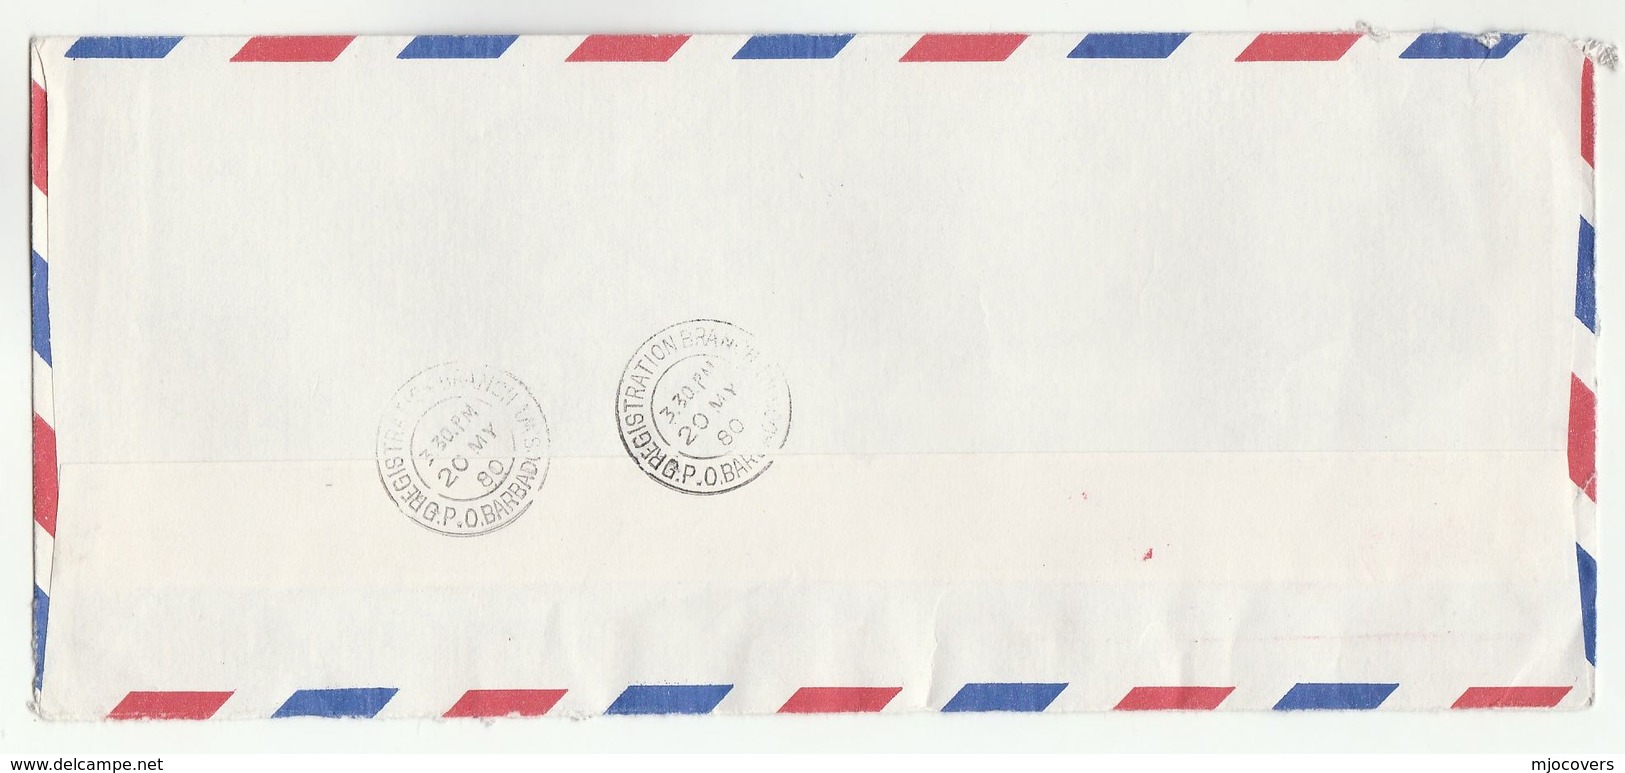 1980 Registered BARBADOS UNIVERSITY COVER  METER 1.50 RN91 Stamps  To Assoc Commonwealth Universites GB - Barbados (1966-...)